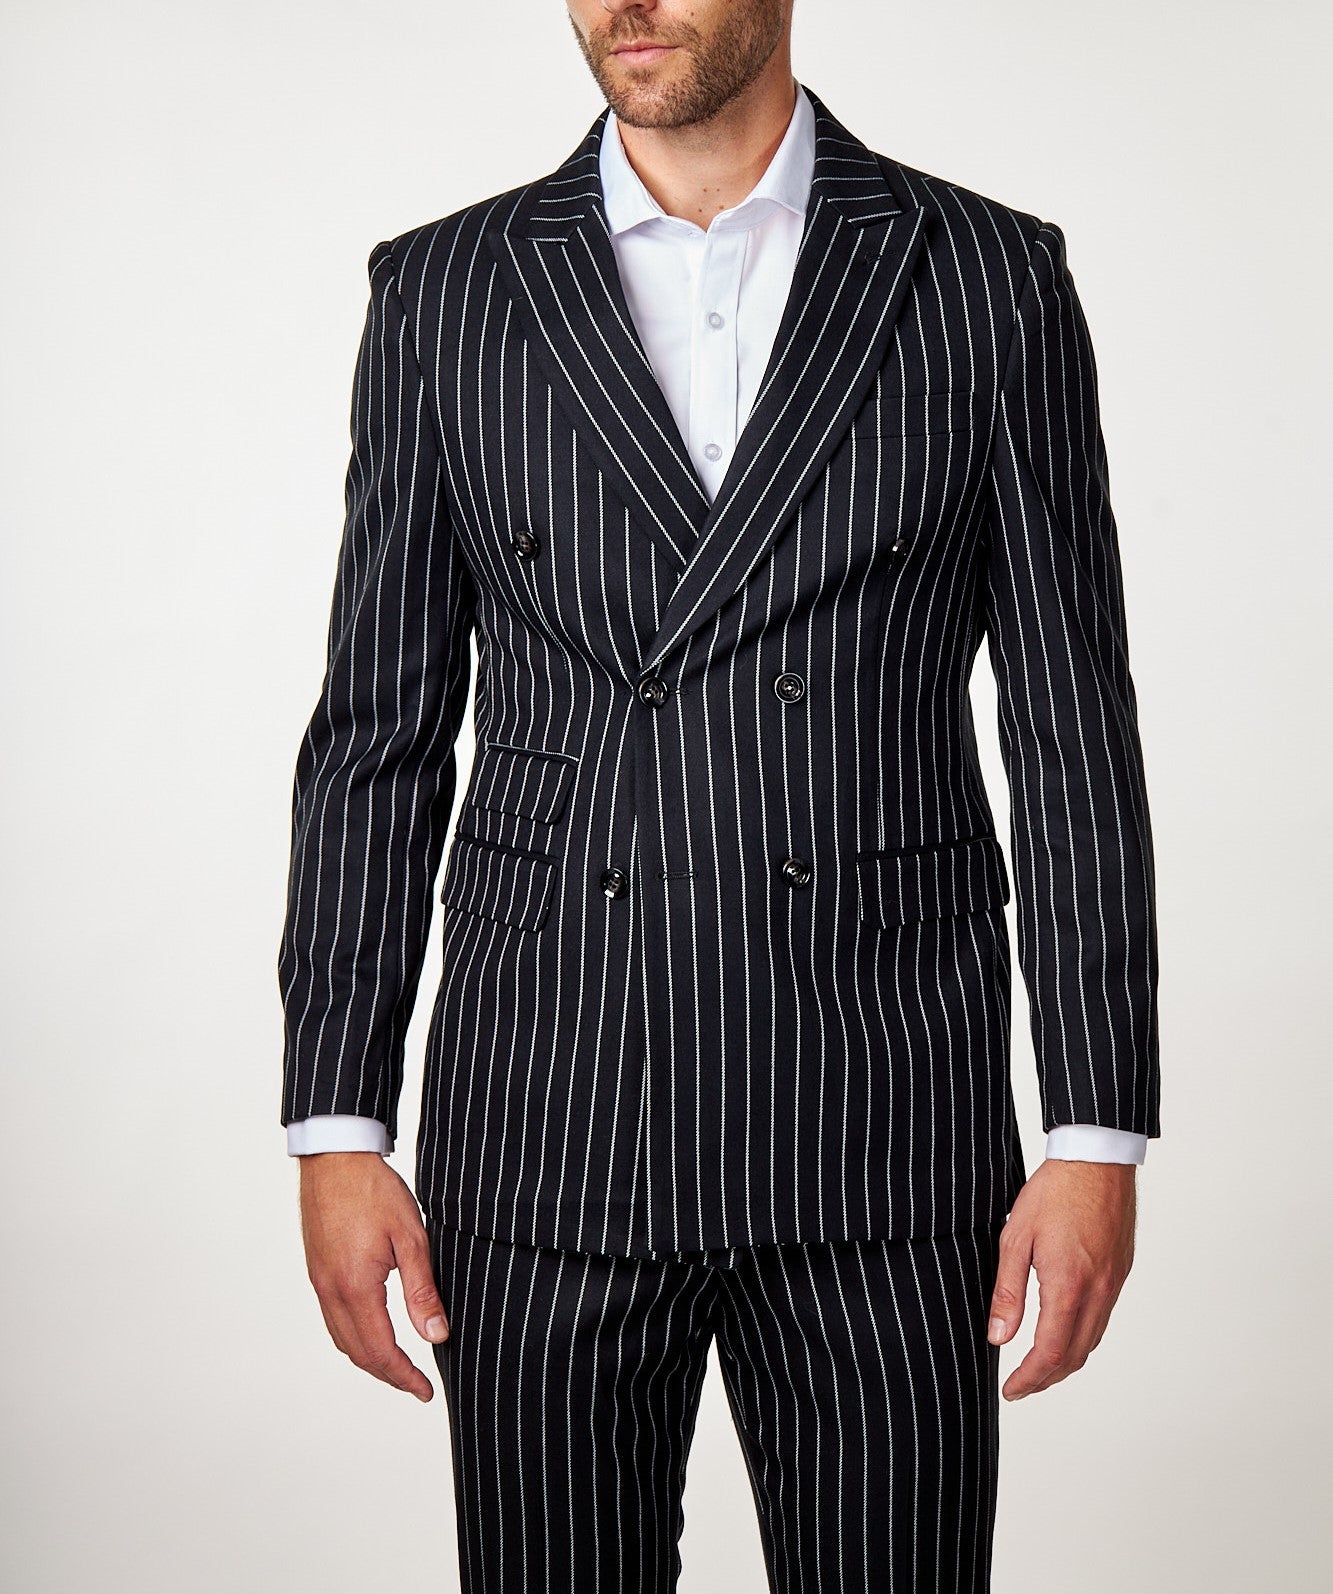 Mens double breasted pinstripe suit in black white